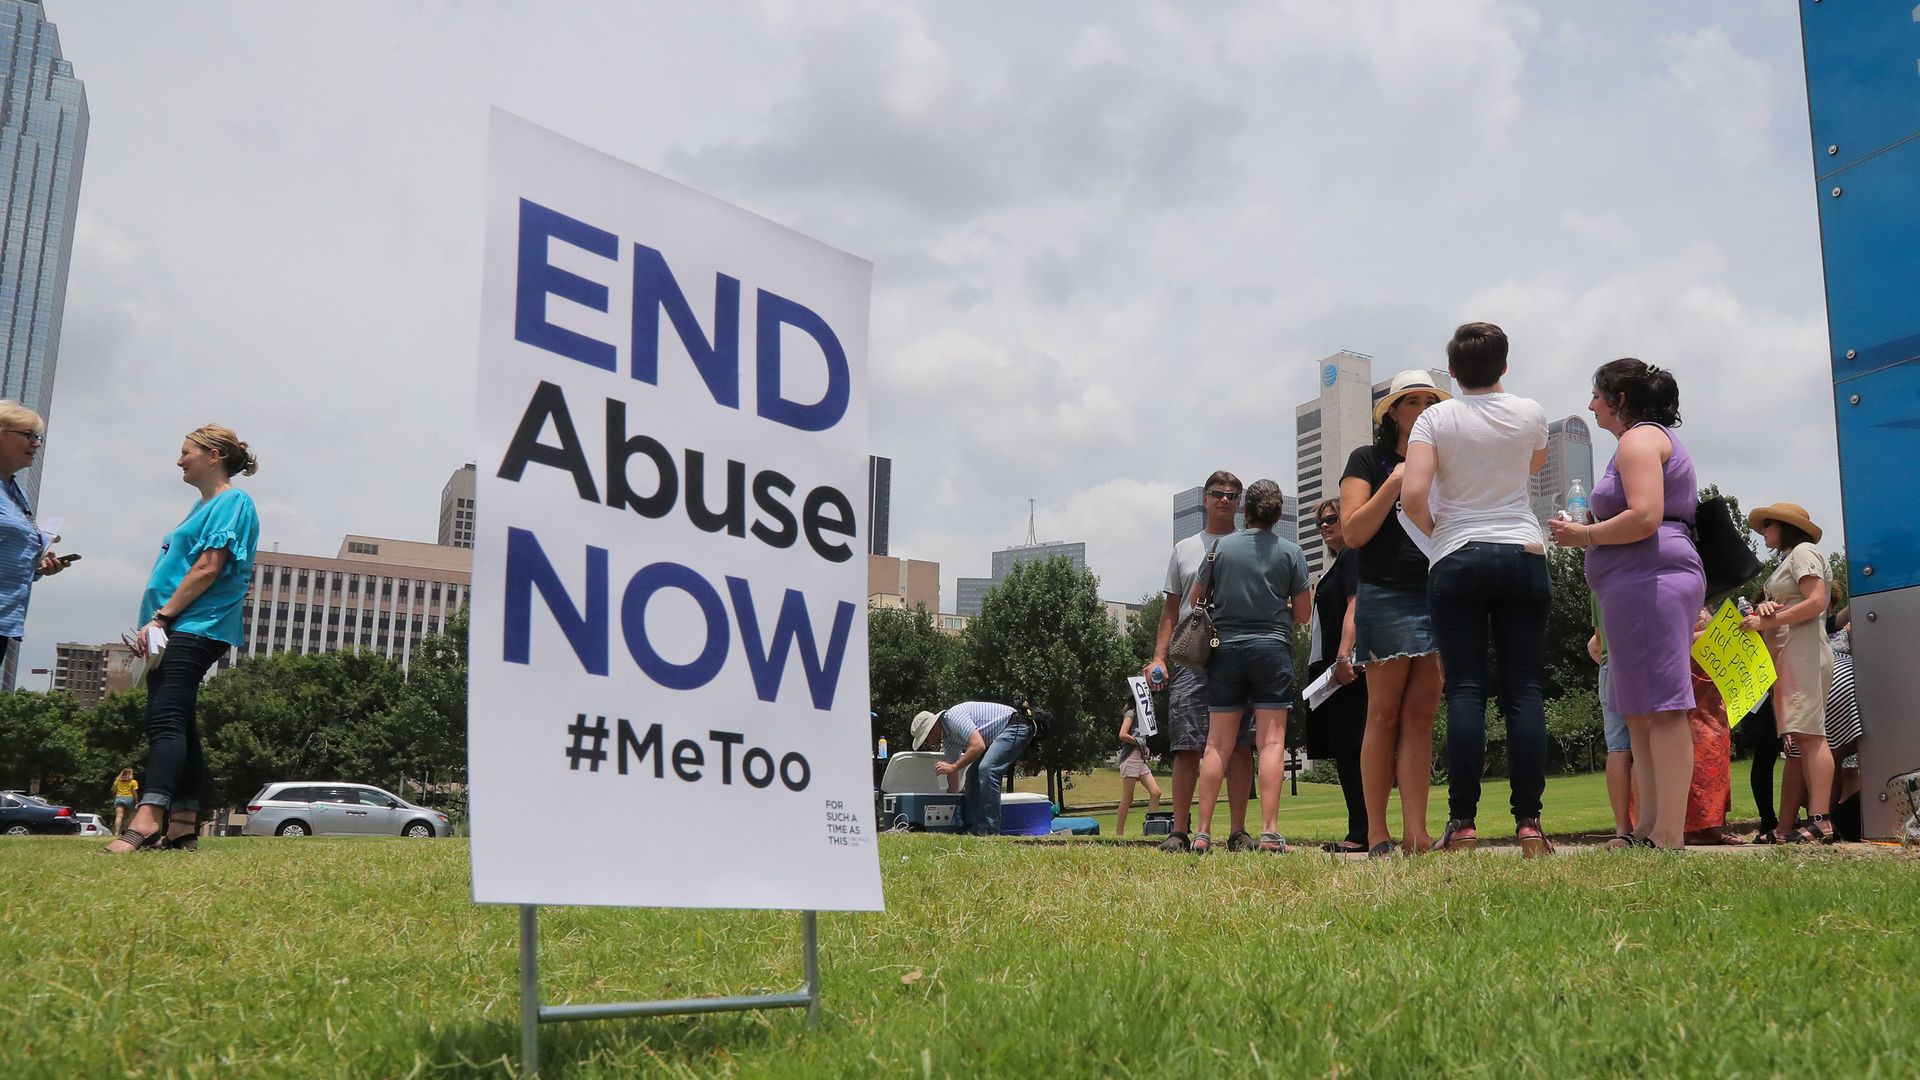 A picture of a sign that says "End Abuse NOW!"